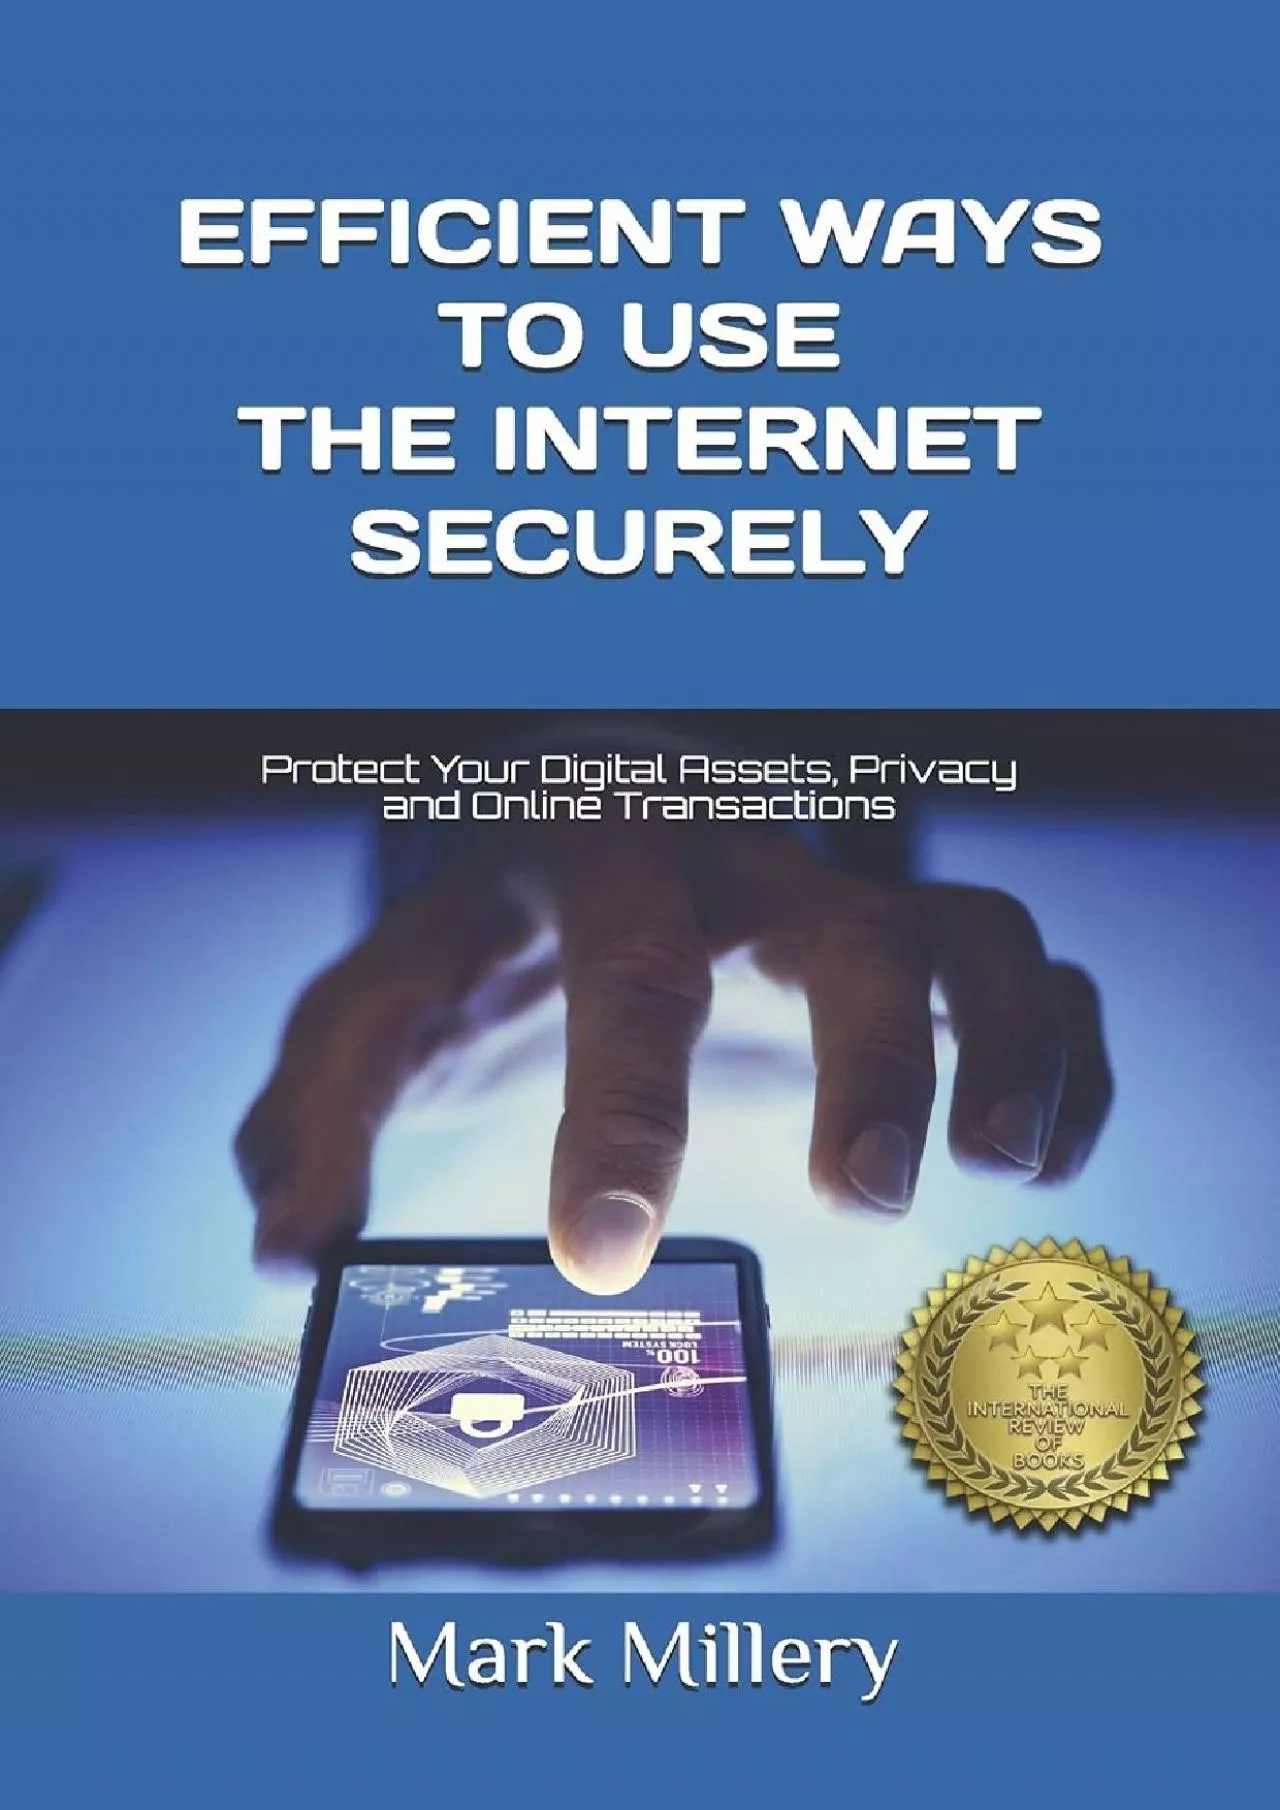 [BEST]-EFFICIENT WAYS TO USE THE INTERNET SECURELY: Protect Your Digital Assets, Privacy